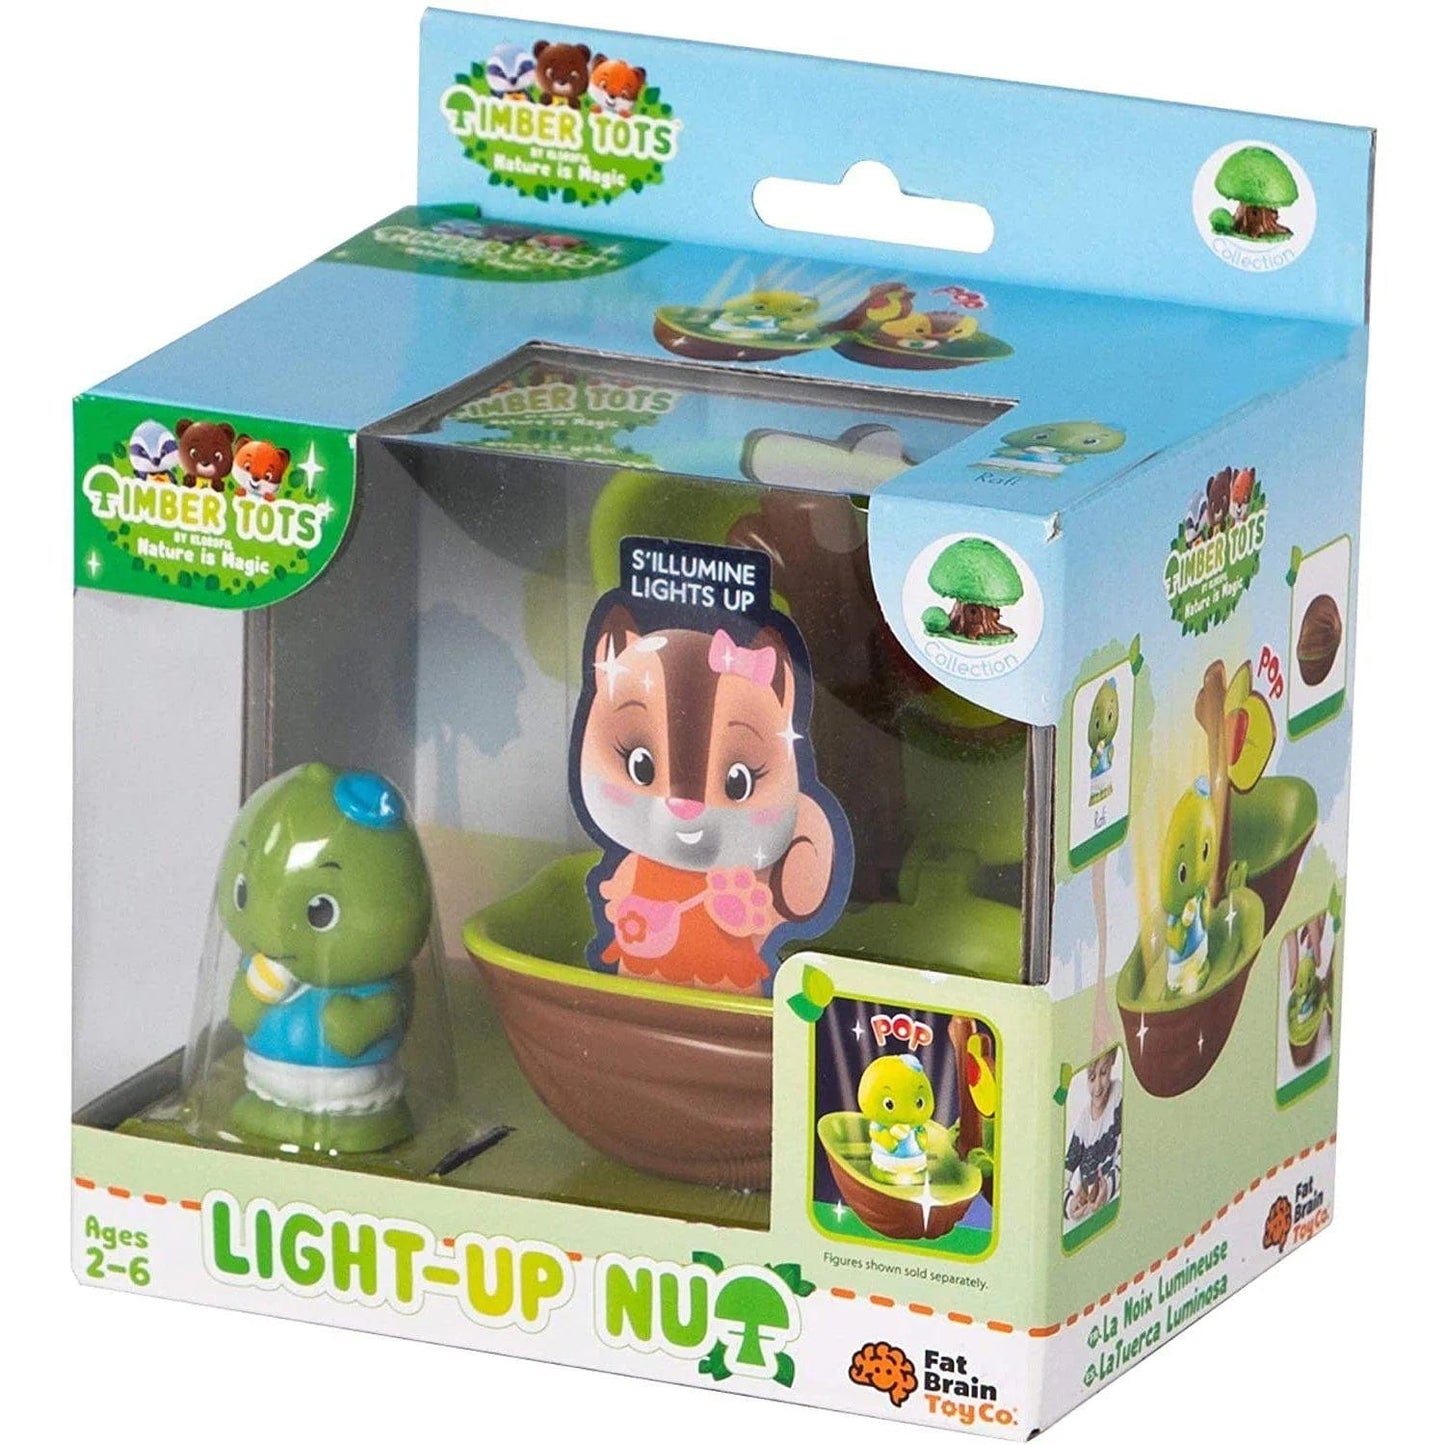 Timber Tots Doll Playsets Default Timber Tots - Light Up Nut